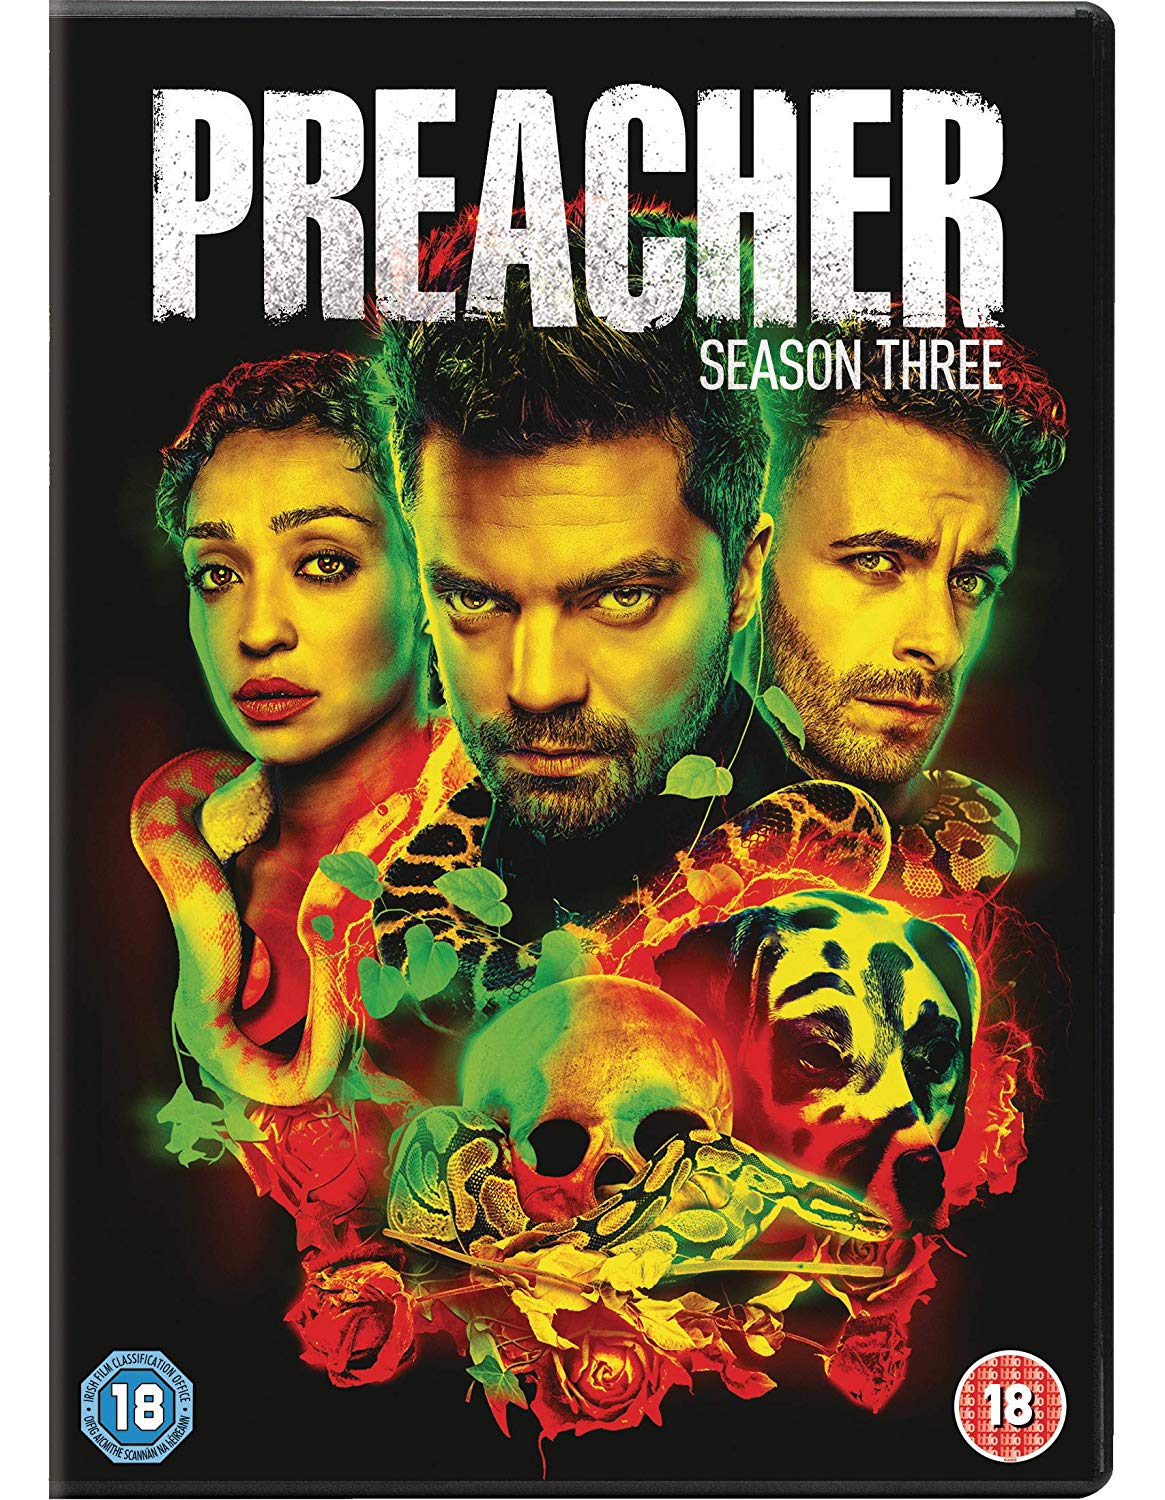 boom competitions - win Preacher on DVD